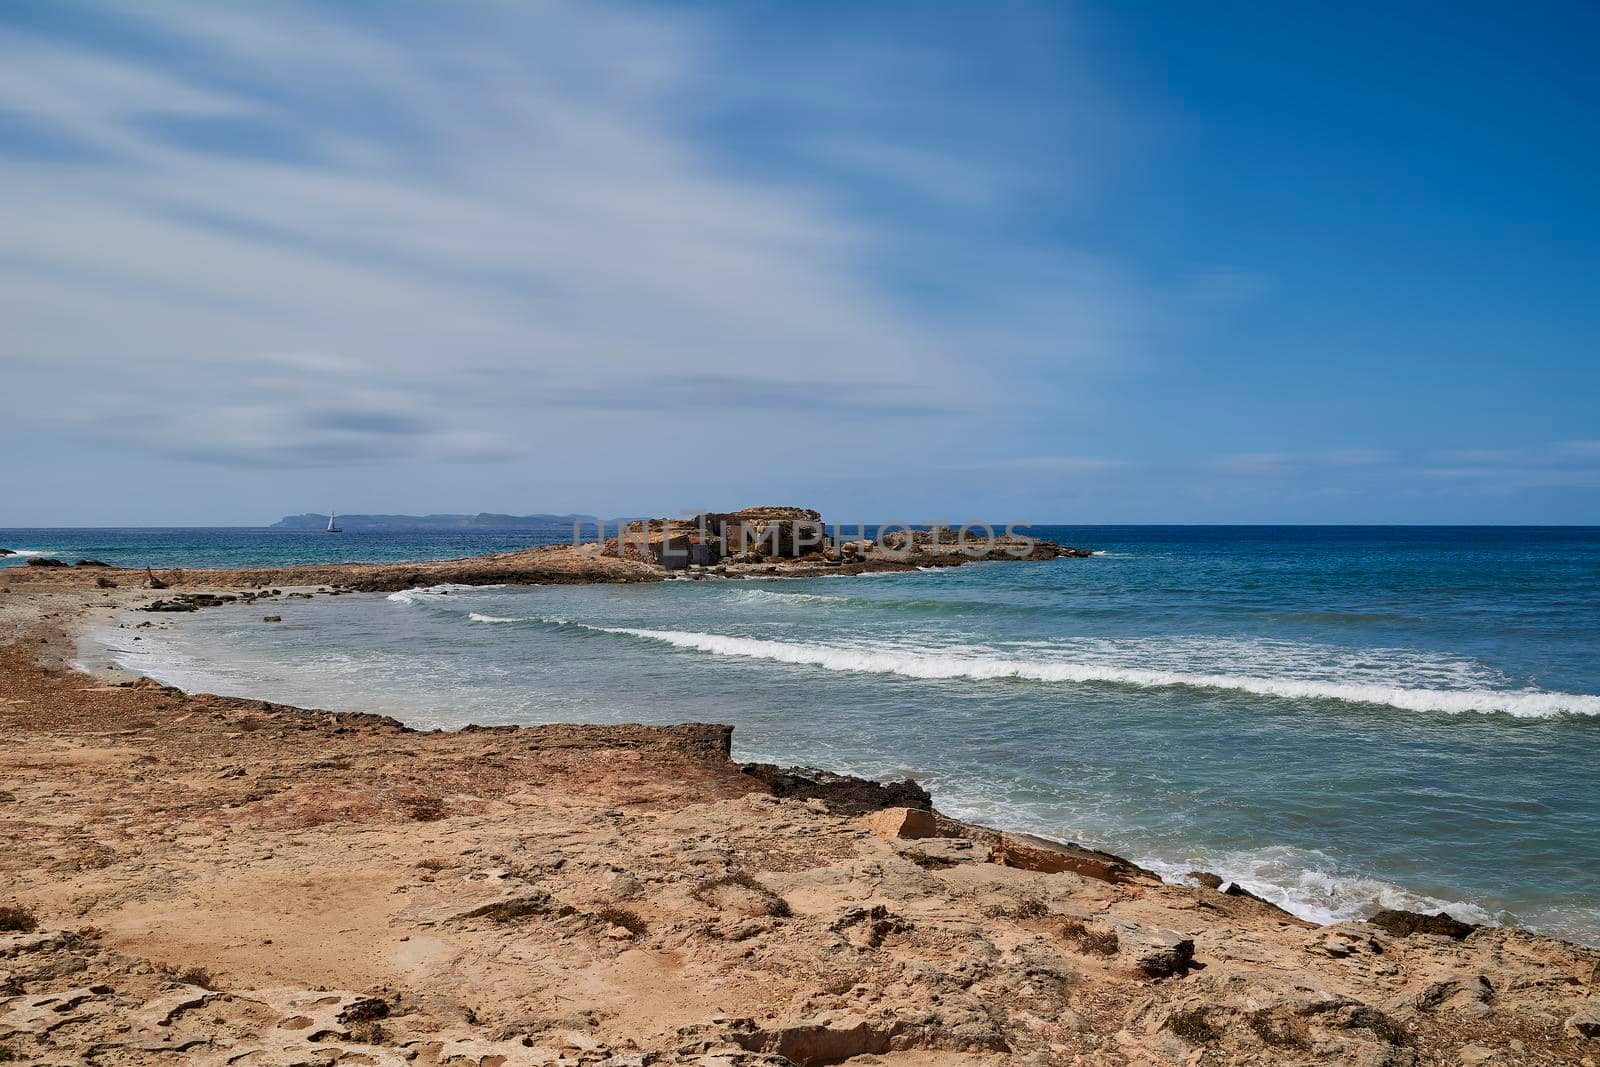 Mediterranean rocky beach. Small waves, rocky cove, sky with few white clouds. Balearic Islands